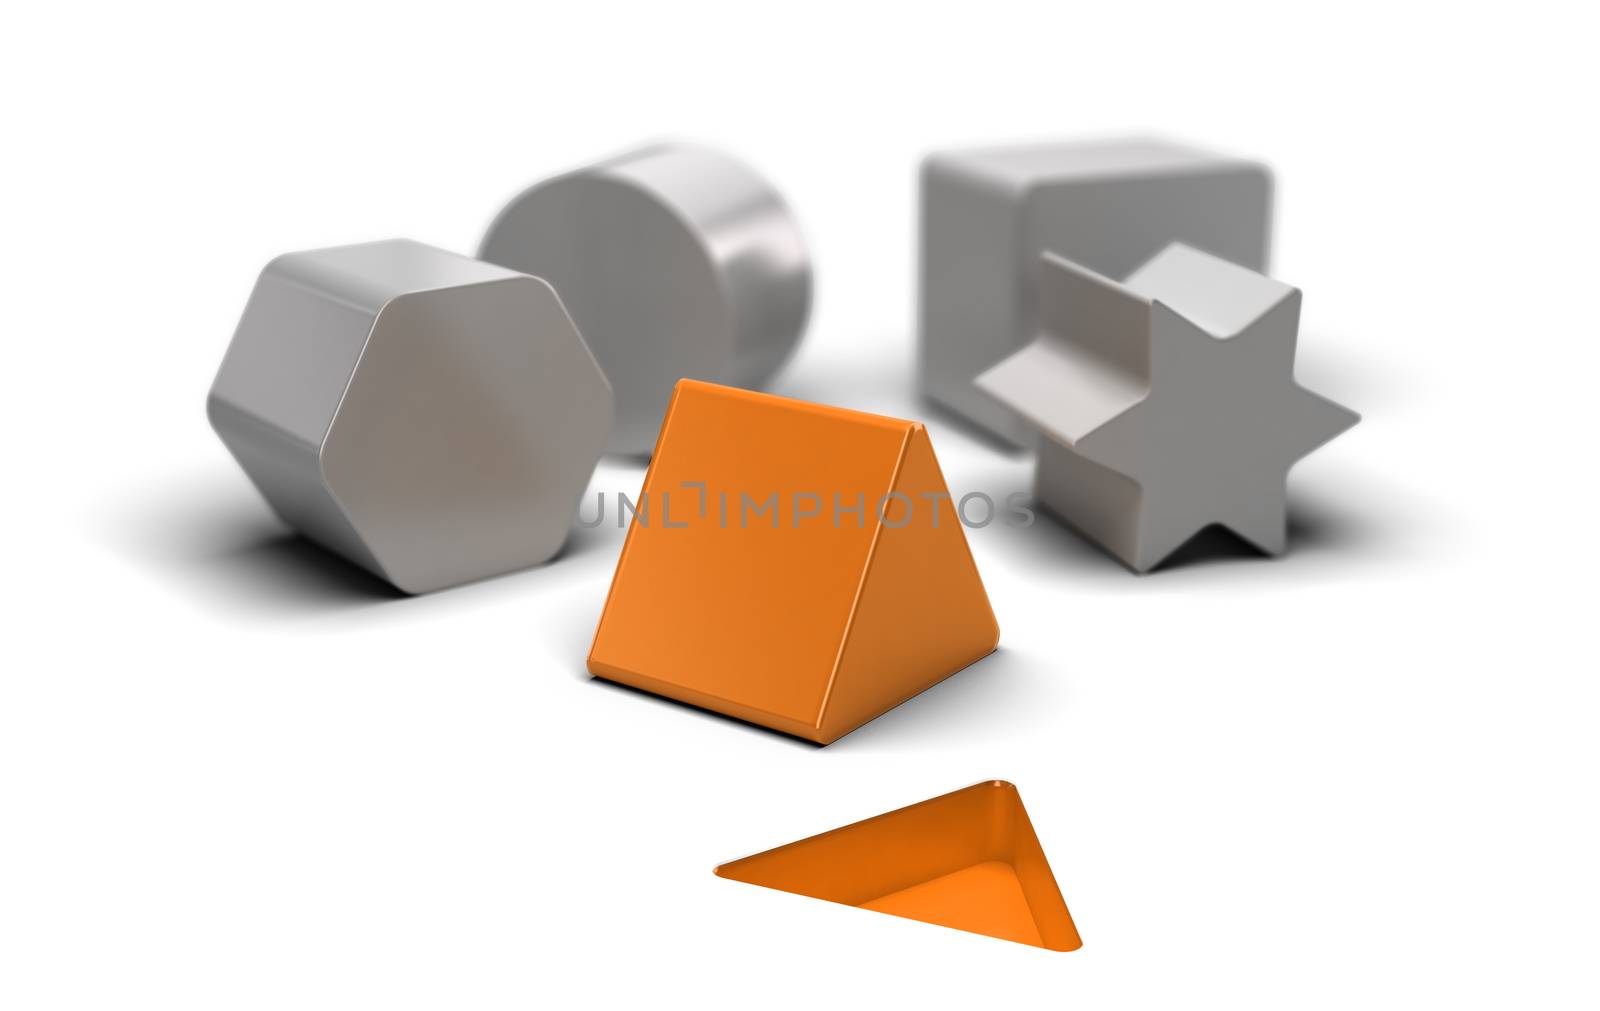 Shaped blocks over white background with an orange one who fit the shape on the floor. Concept image for illustration of easy and simple things